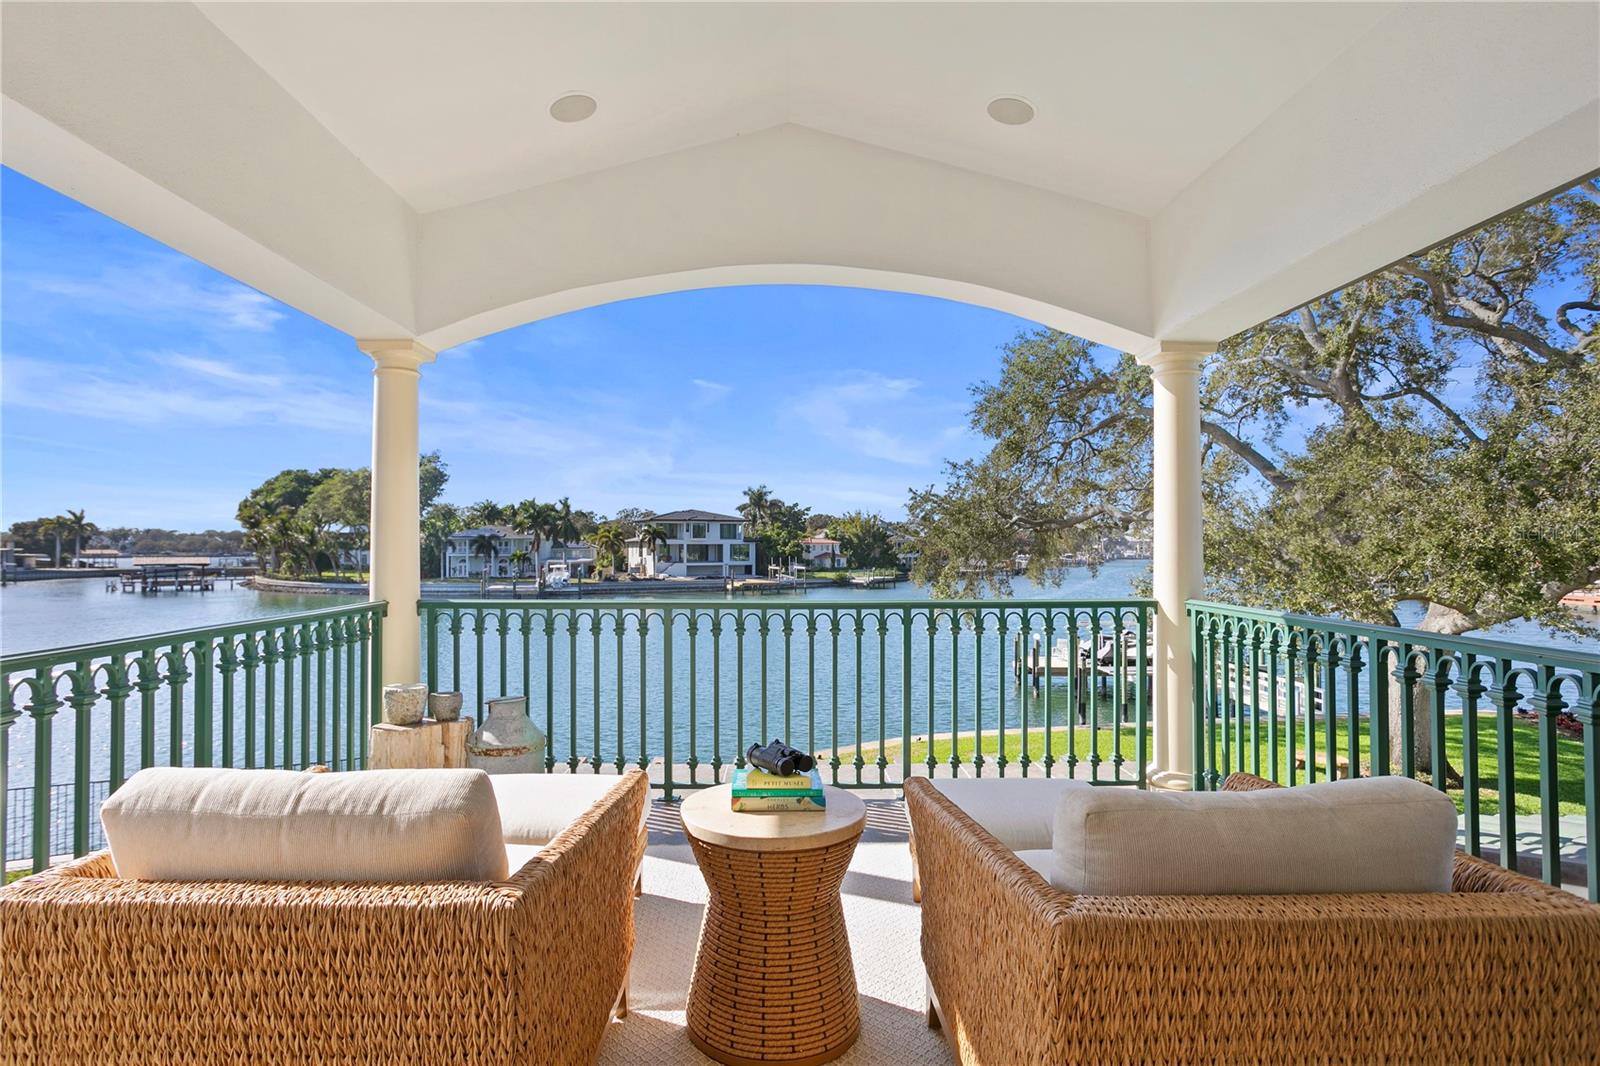 The primary bedroom balcony is a great place to enjoy your coffee all while watching the manatees play.